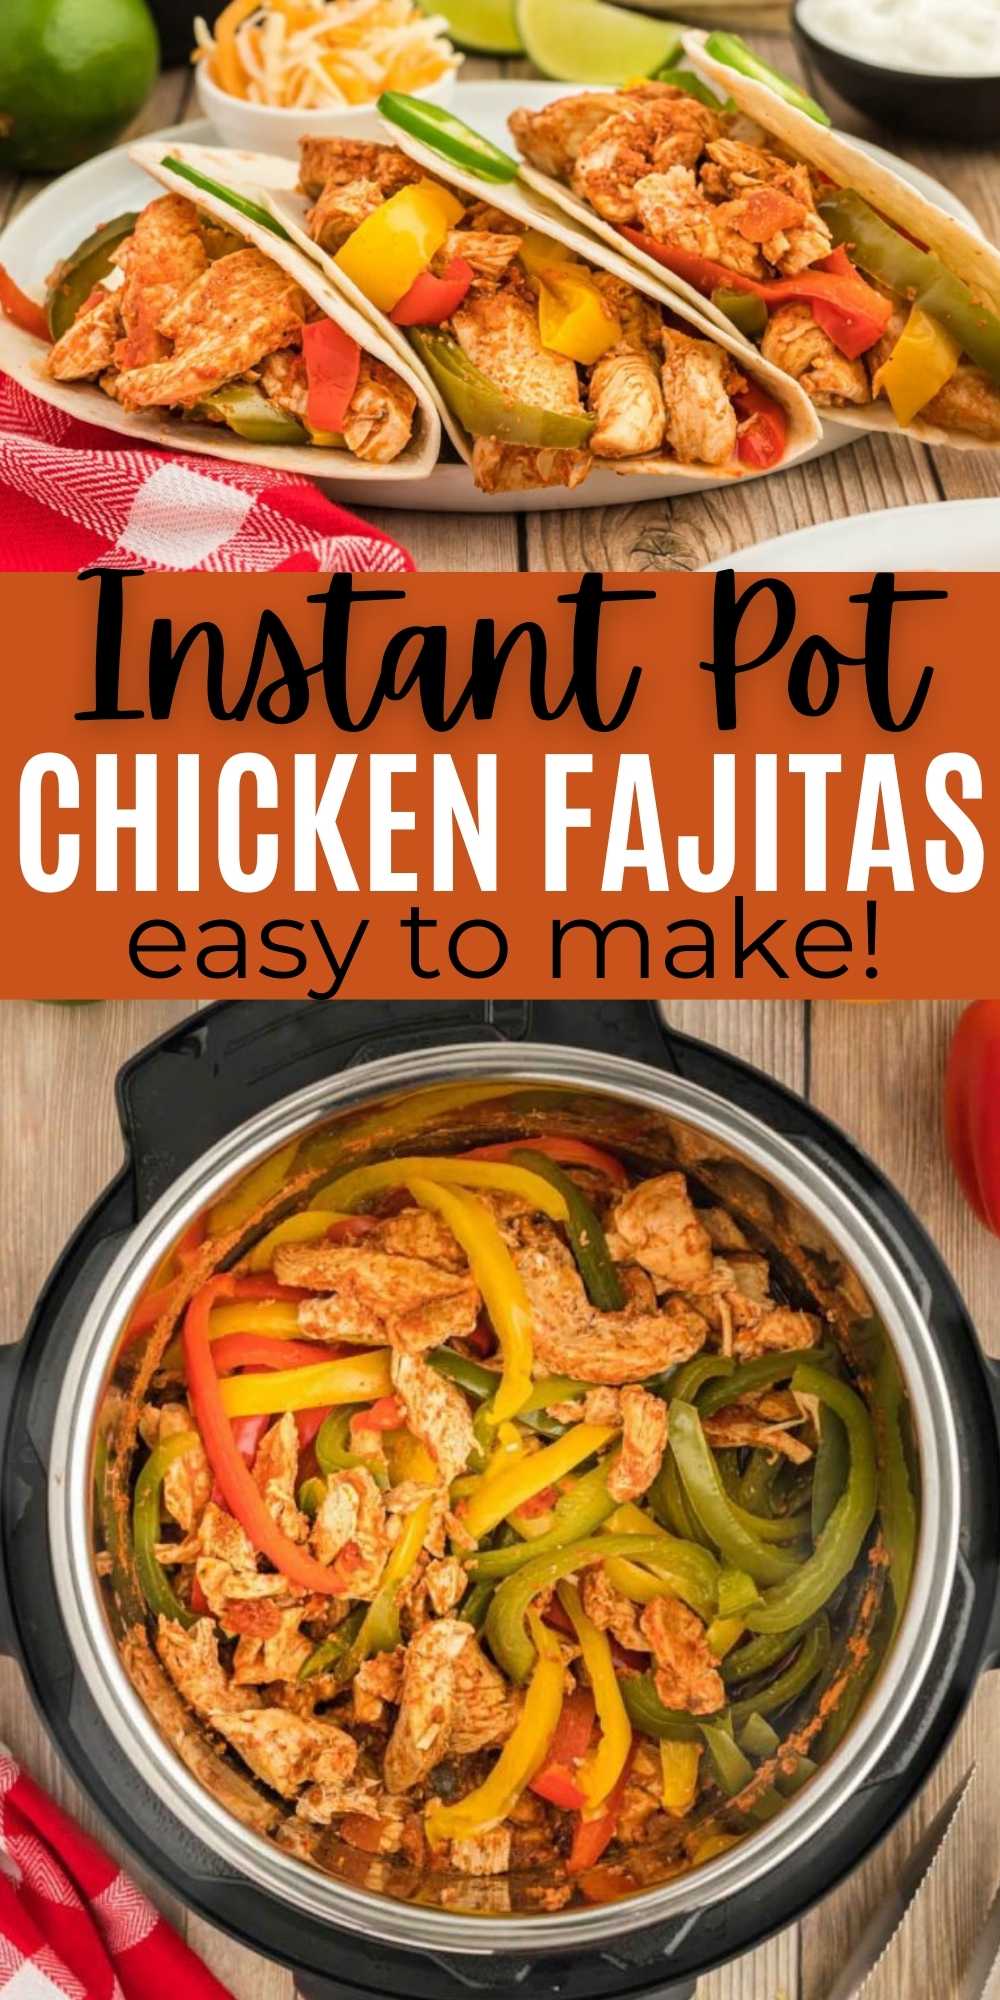 Enjoy fajitas any day of the week when you make Instant Pot Chicken Fajitas Recipe in minutes. Chicken and Veggies makes these fajitas easy. Simple ingredients is all you need to make these delicious fajitas. #eatingonadime #chickenfajitas #instantpotrecipes